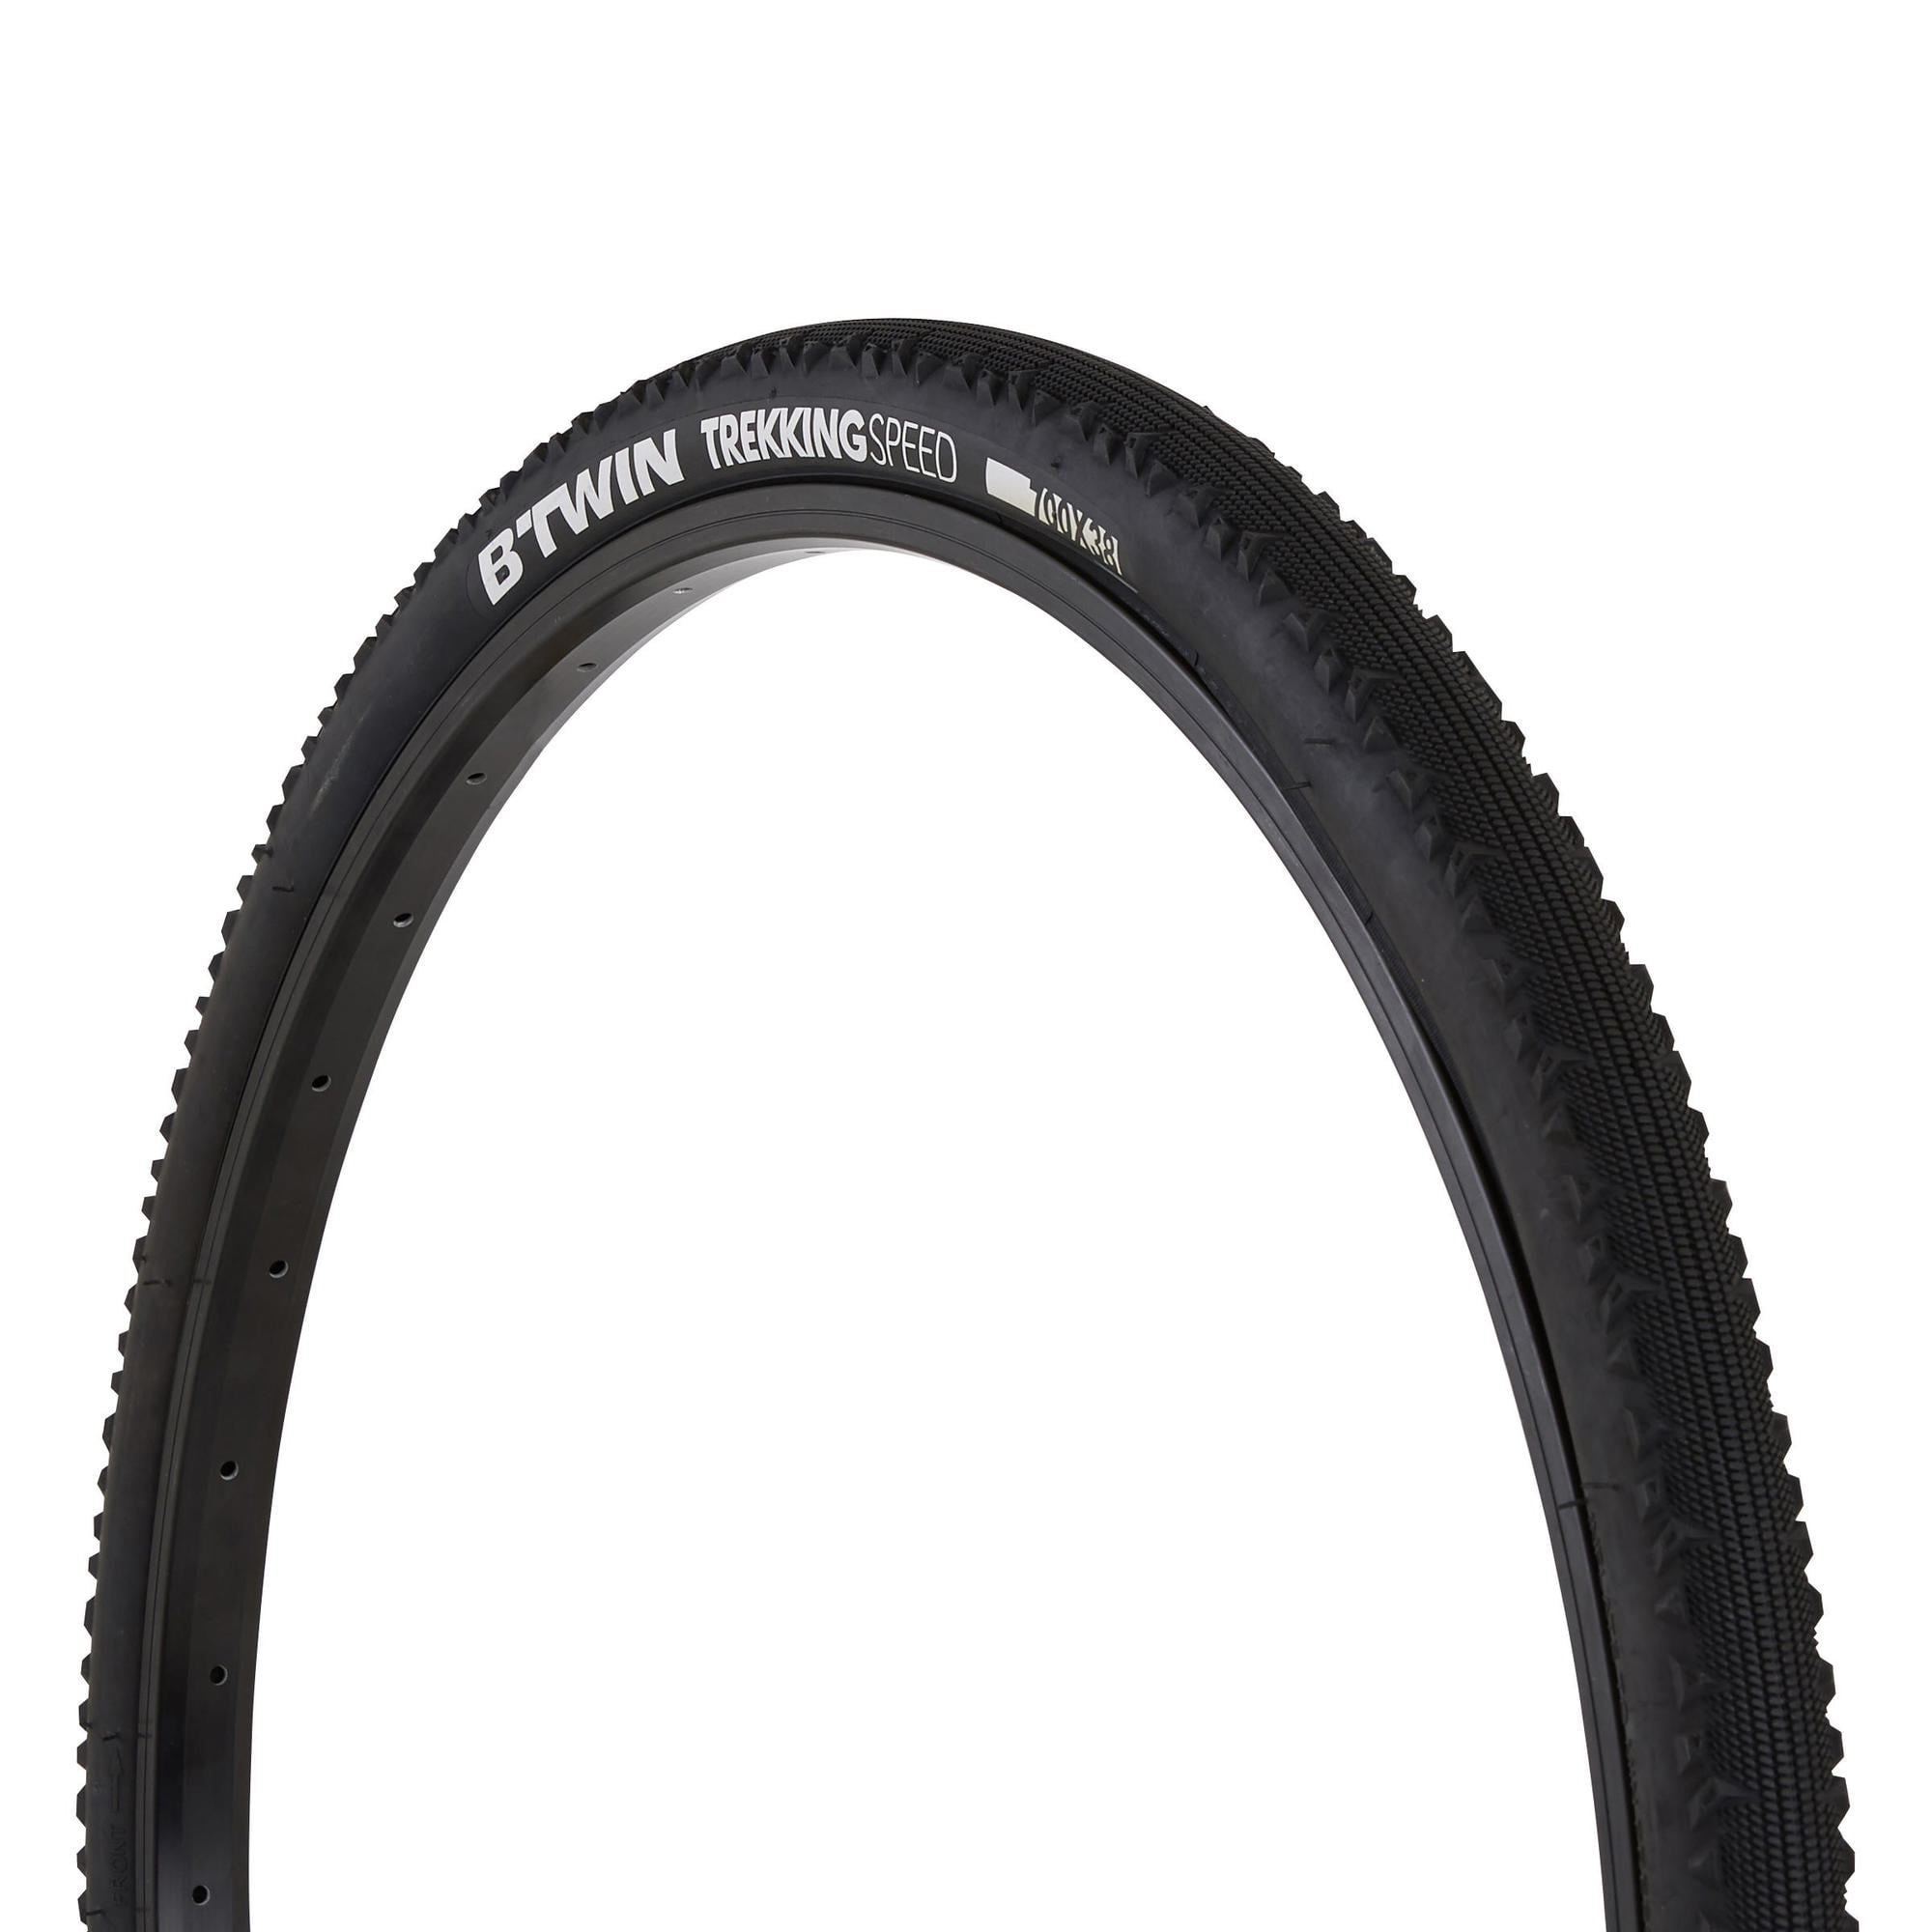 Bell Air Guard 7115511 700c x 32-45 Hybrid Reflective Bike Tire Black for sale online 